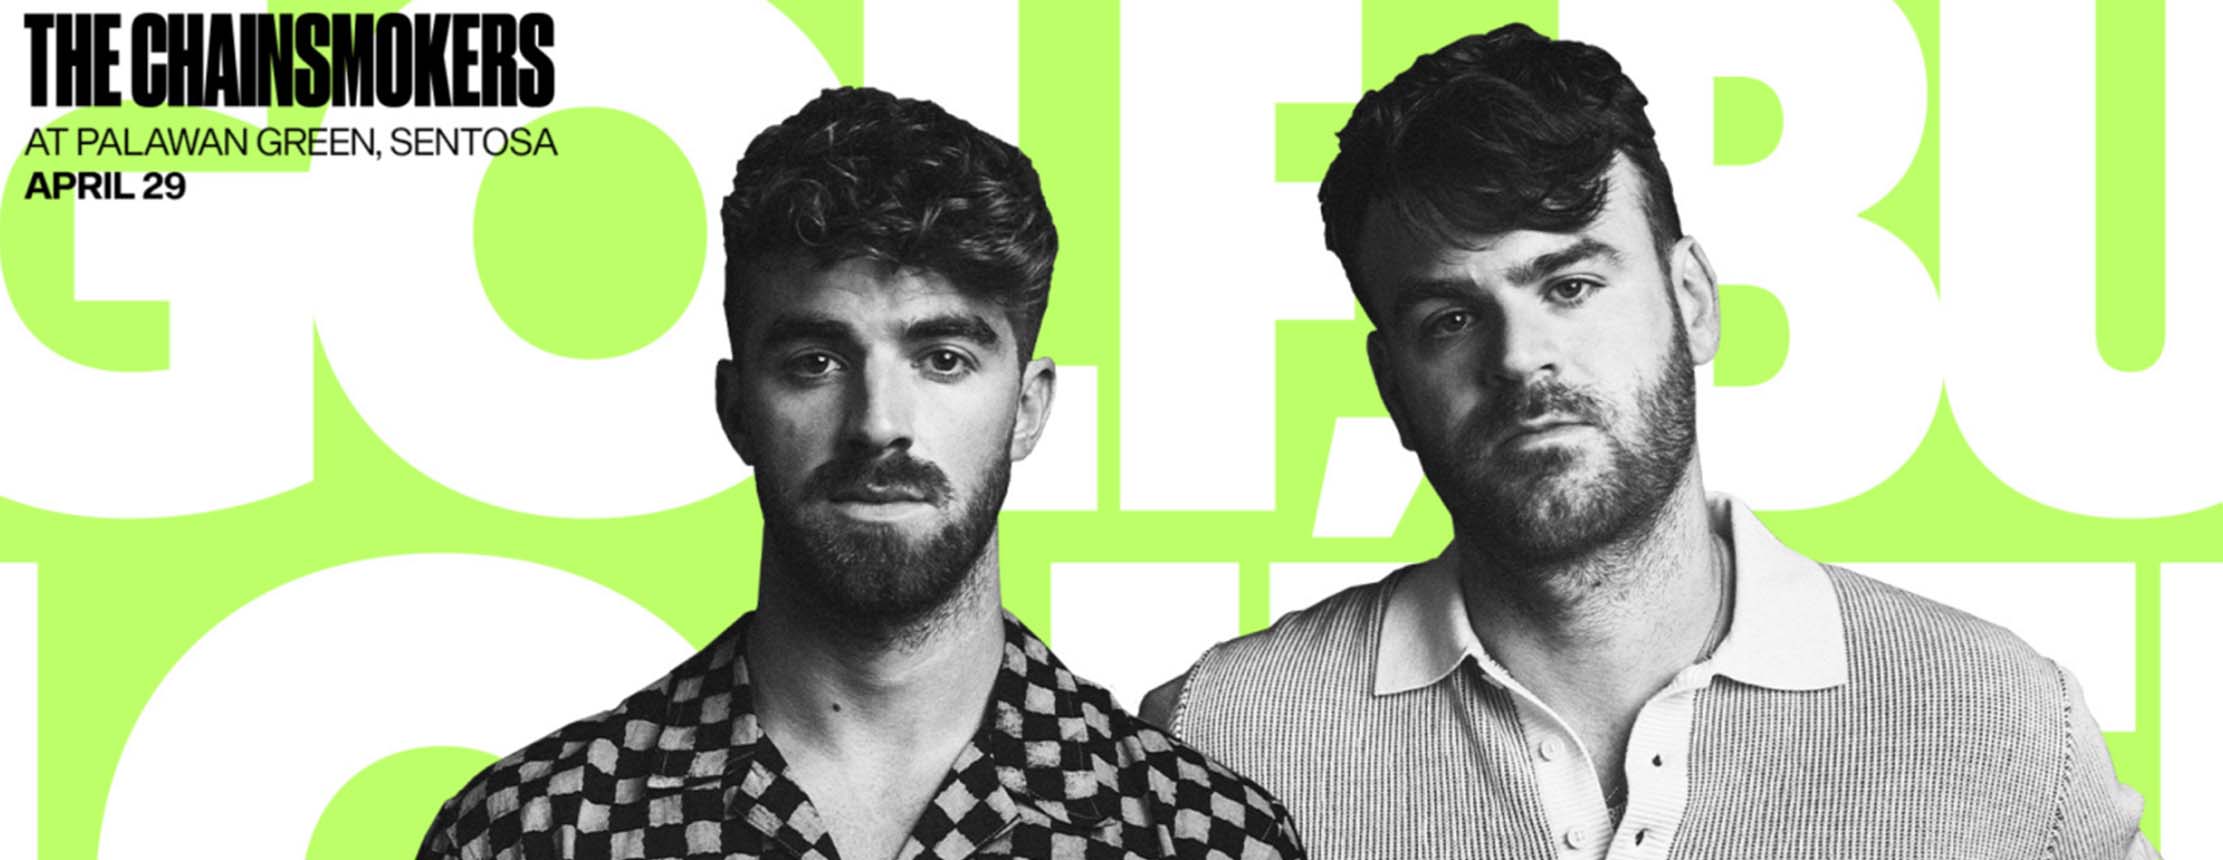 Chainsmokers liv golf poster